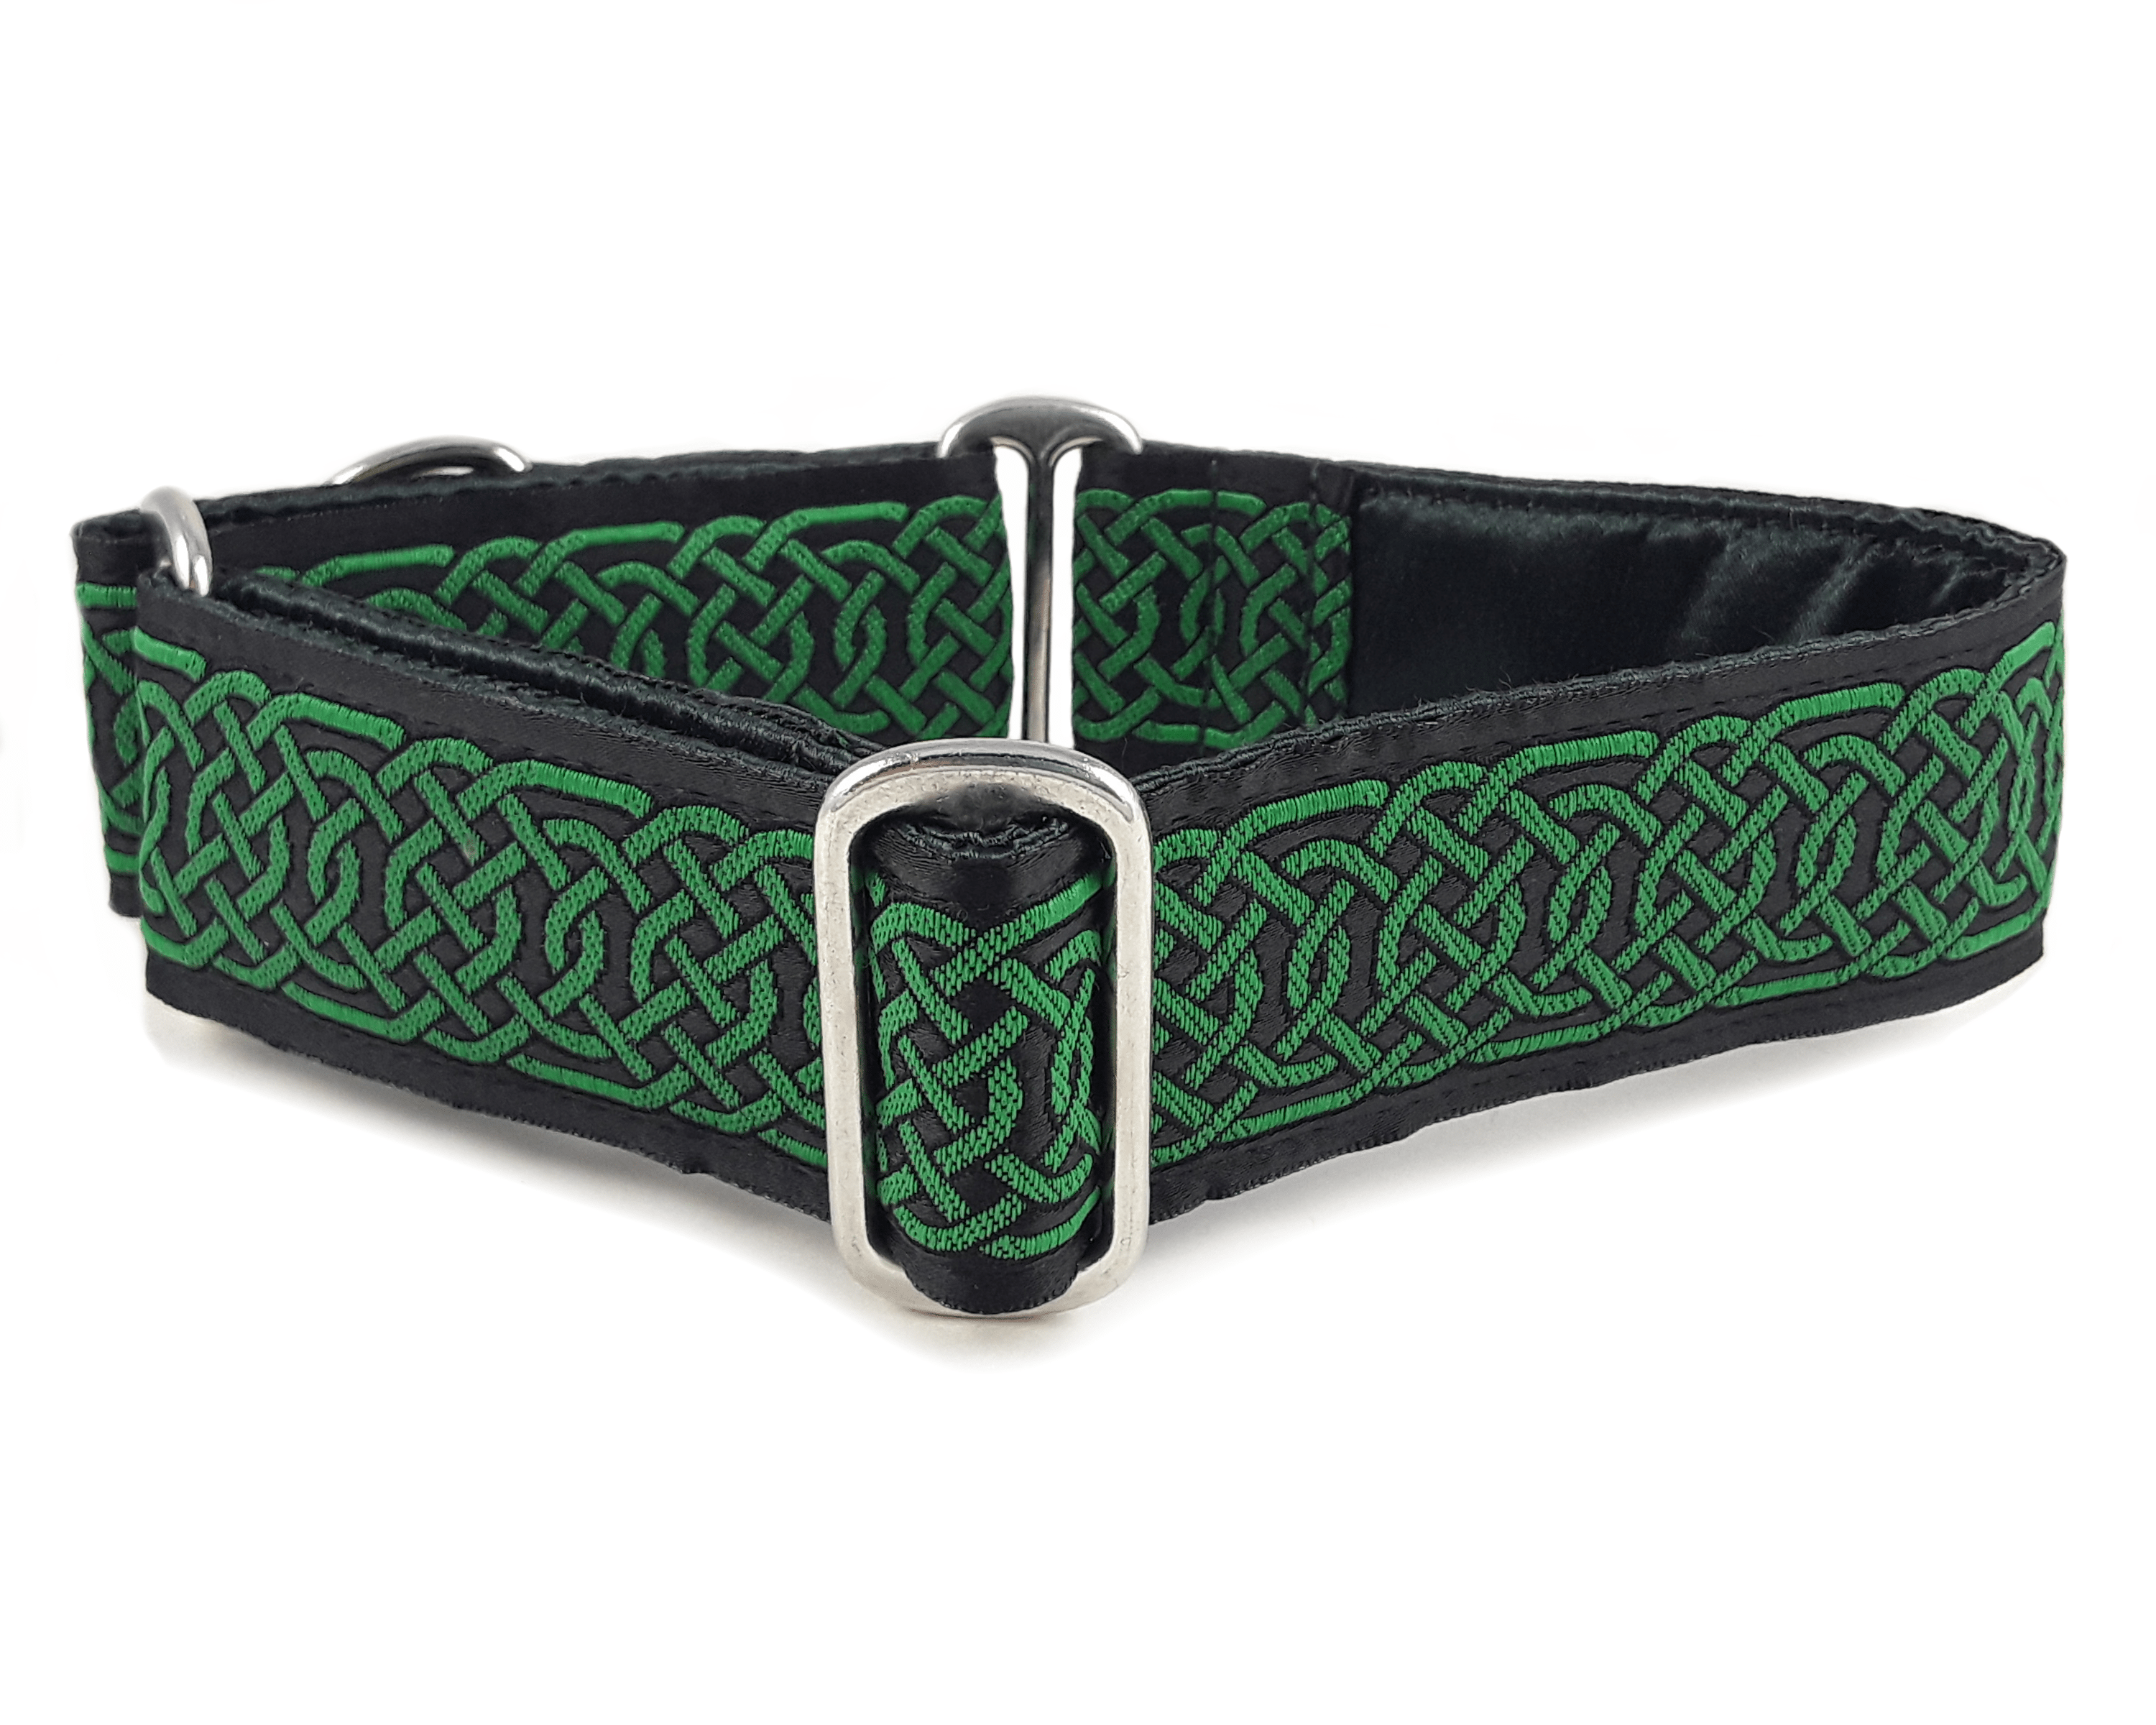 Wexford Jacquard in Green & Black - Martingale Dog Collar or Buckle Dog Collar - 1.5" Width - The Hound Haberdashery